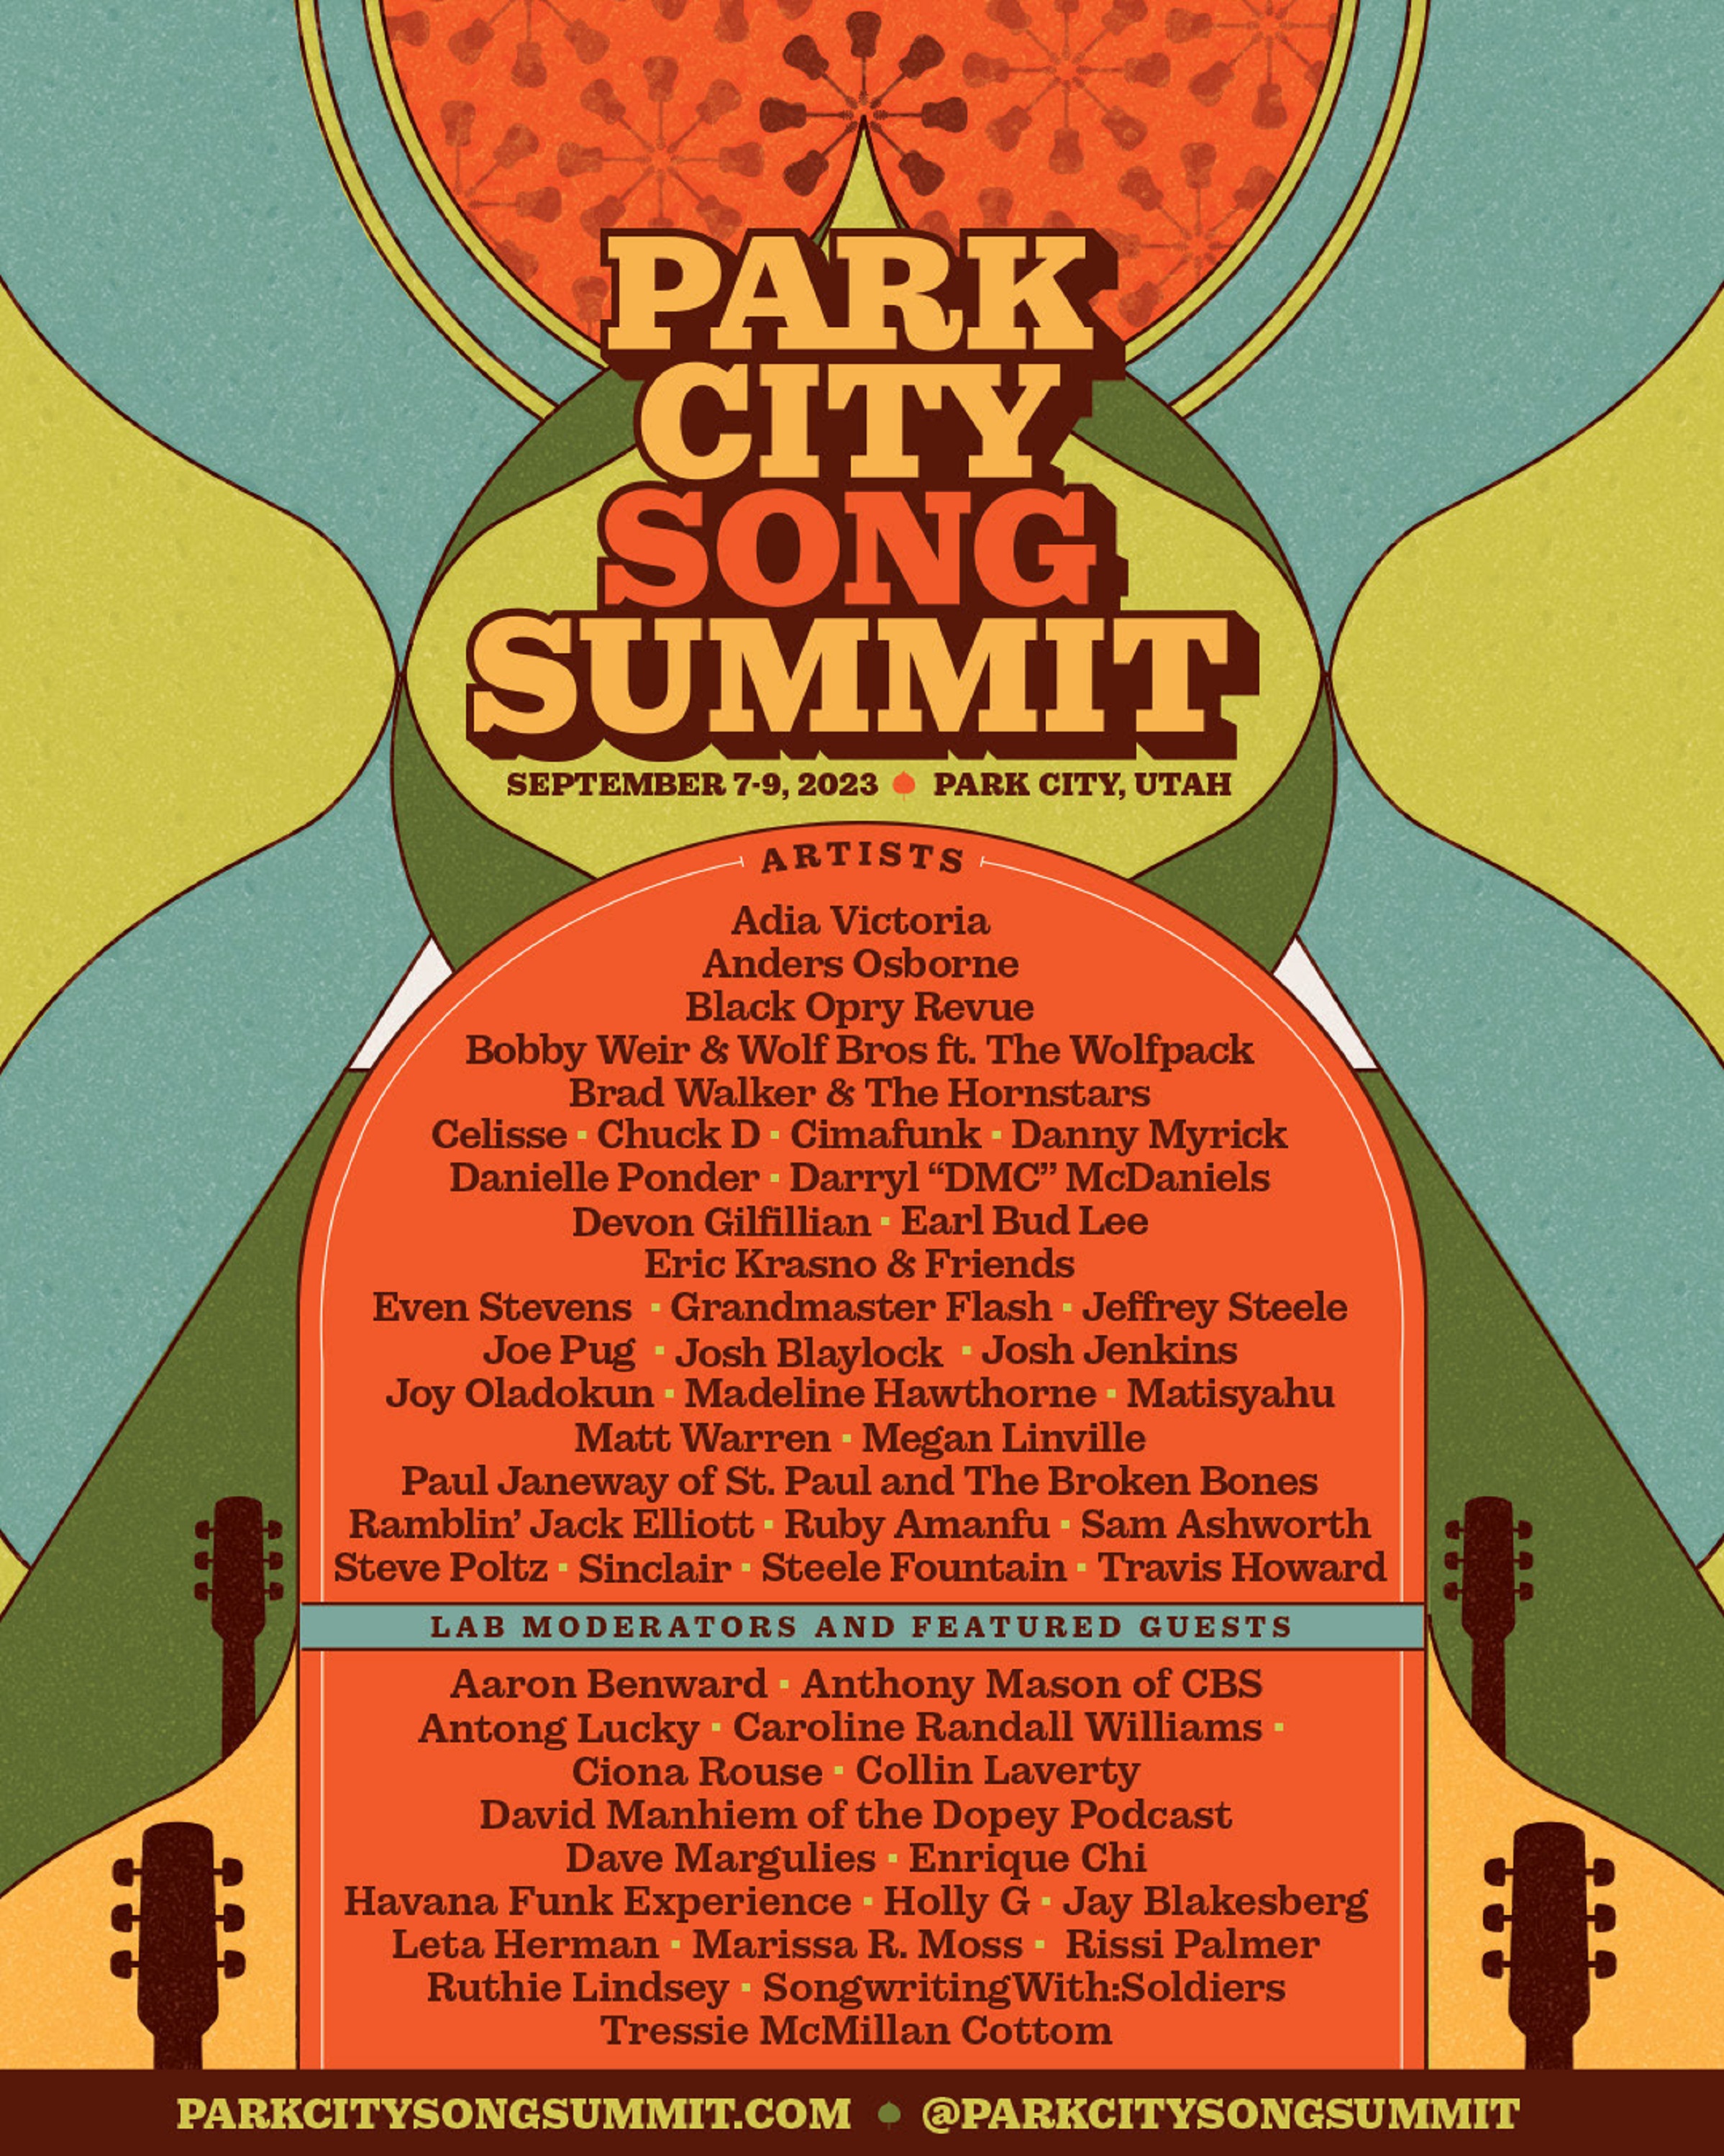 Park City Song Summit 2023 Announces Summit Labs Lineup For 2023